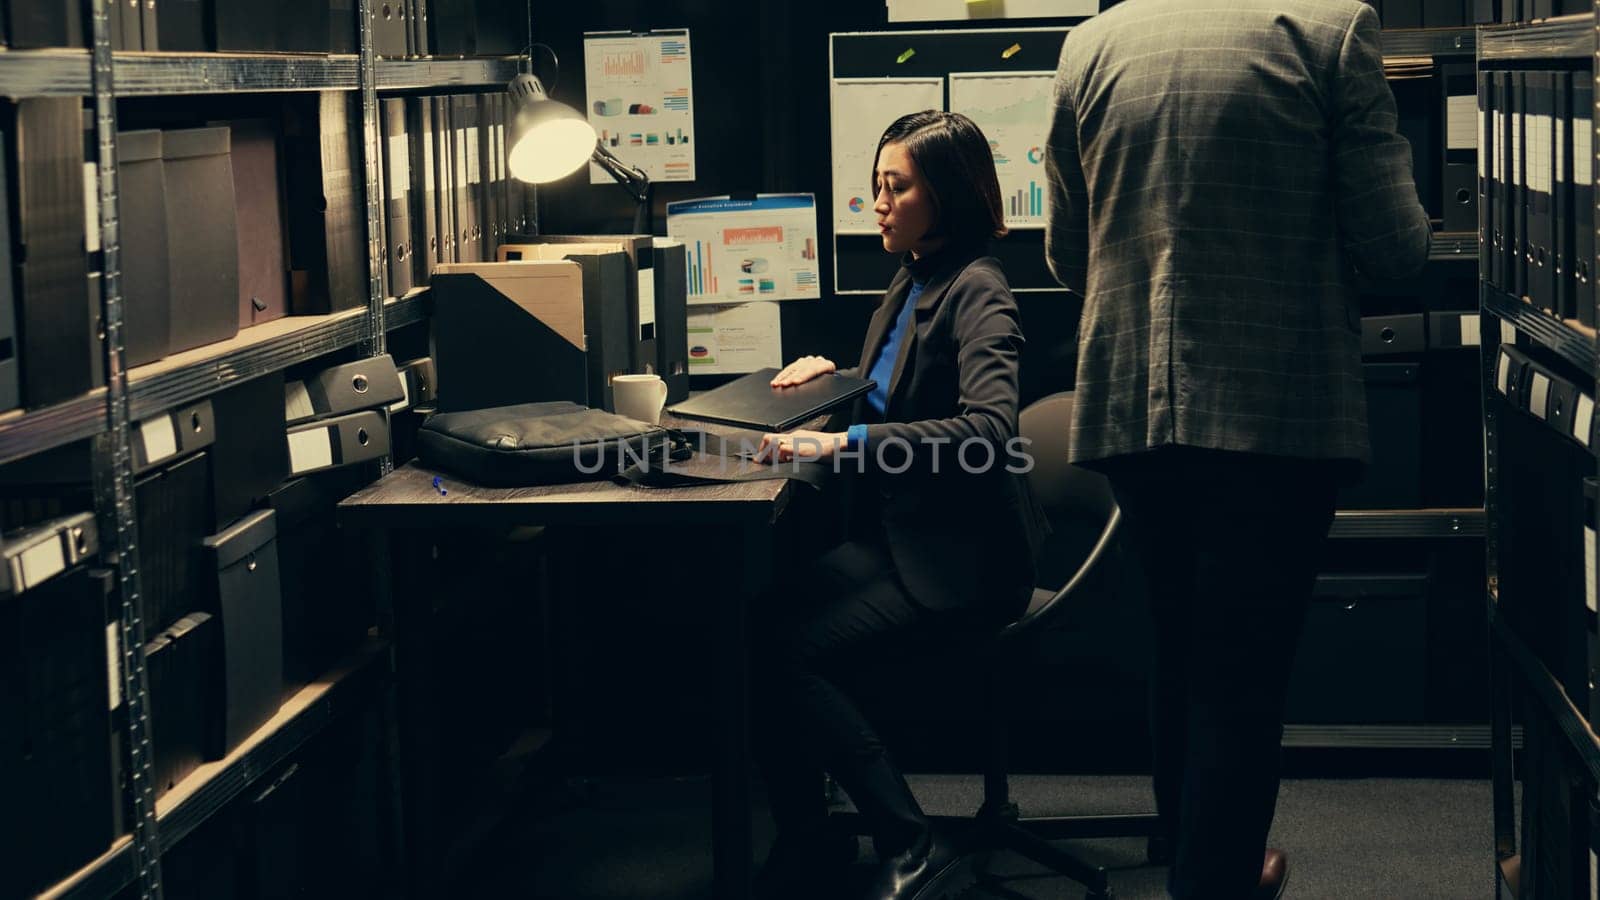 Woman detective arriving at job to solve police investigation, entering archive room to work on criminal case. Asian investigator recreating crime scenes based on archived evidence. Camera B.